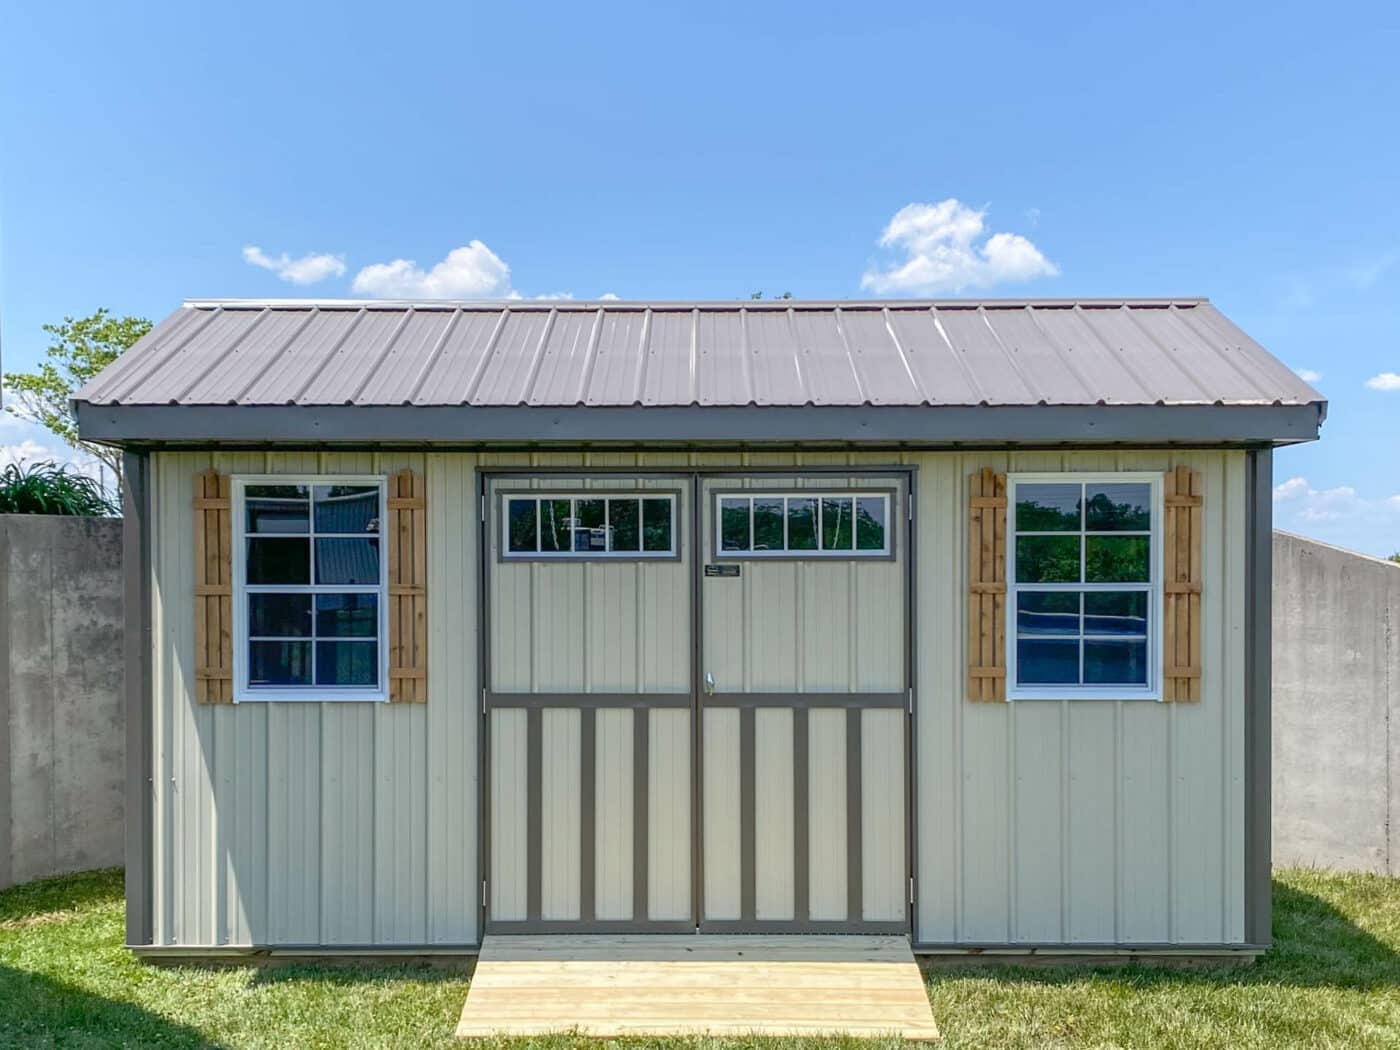 garden shed built by Premier Barns with wood shutters and tan siding